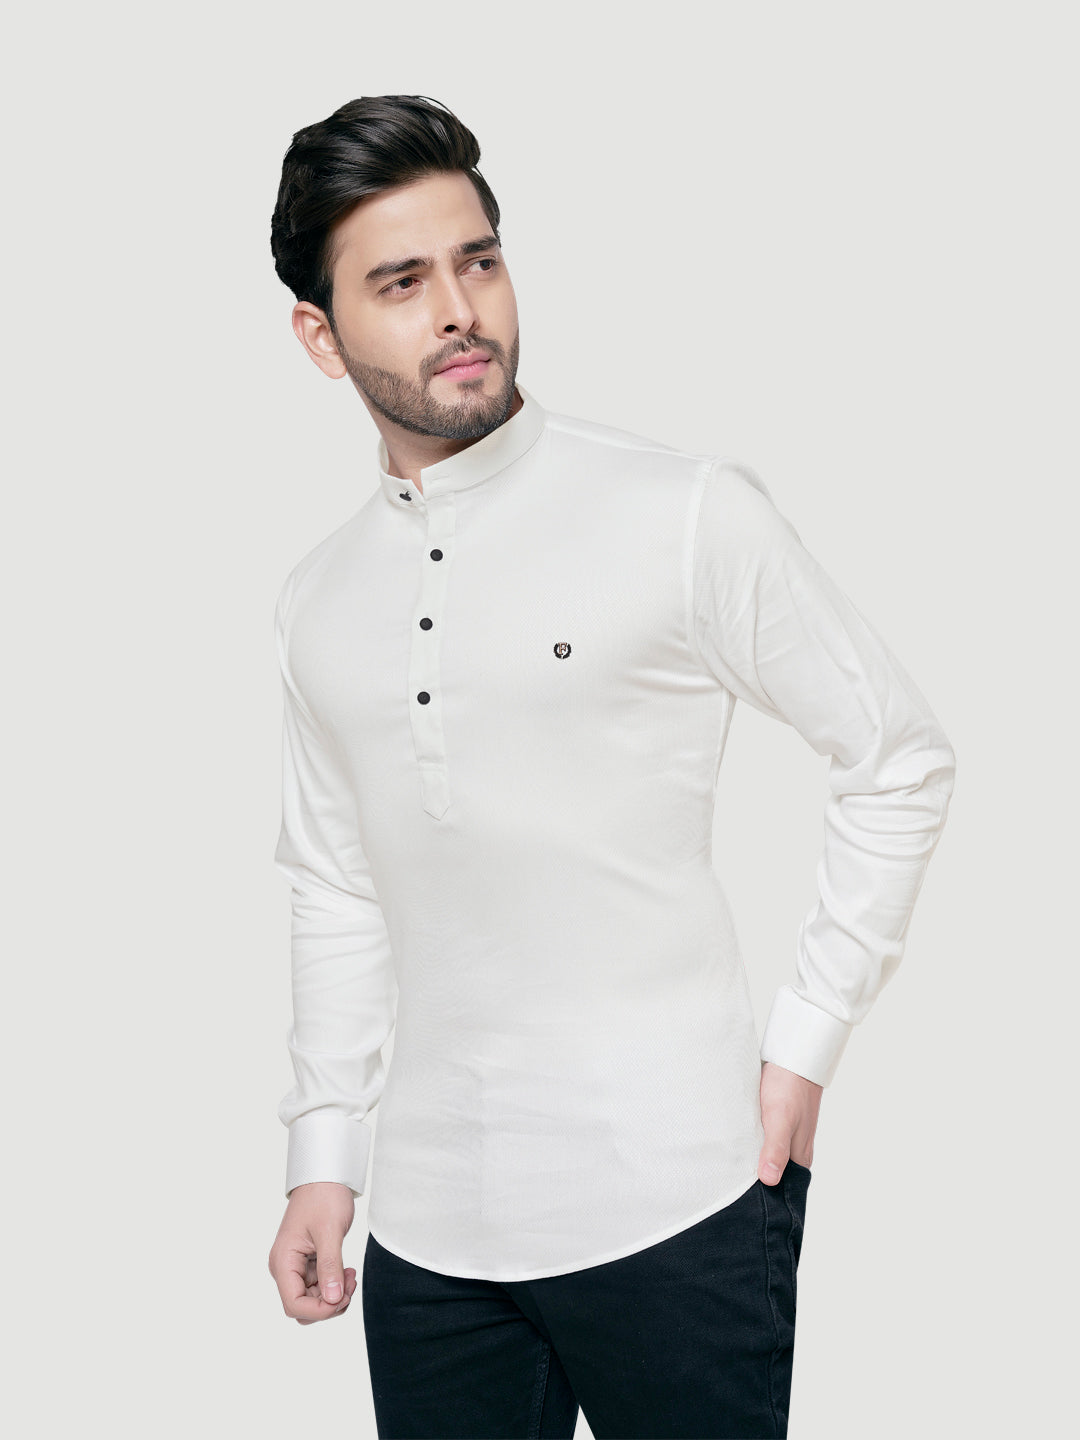 Black and White Men's Designer Shirt with Collar Accessory & Broach-18